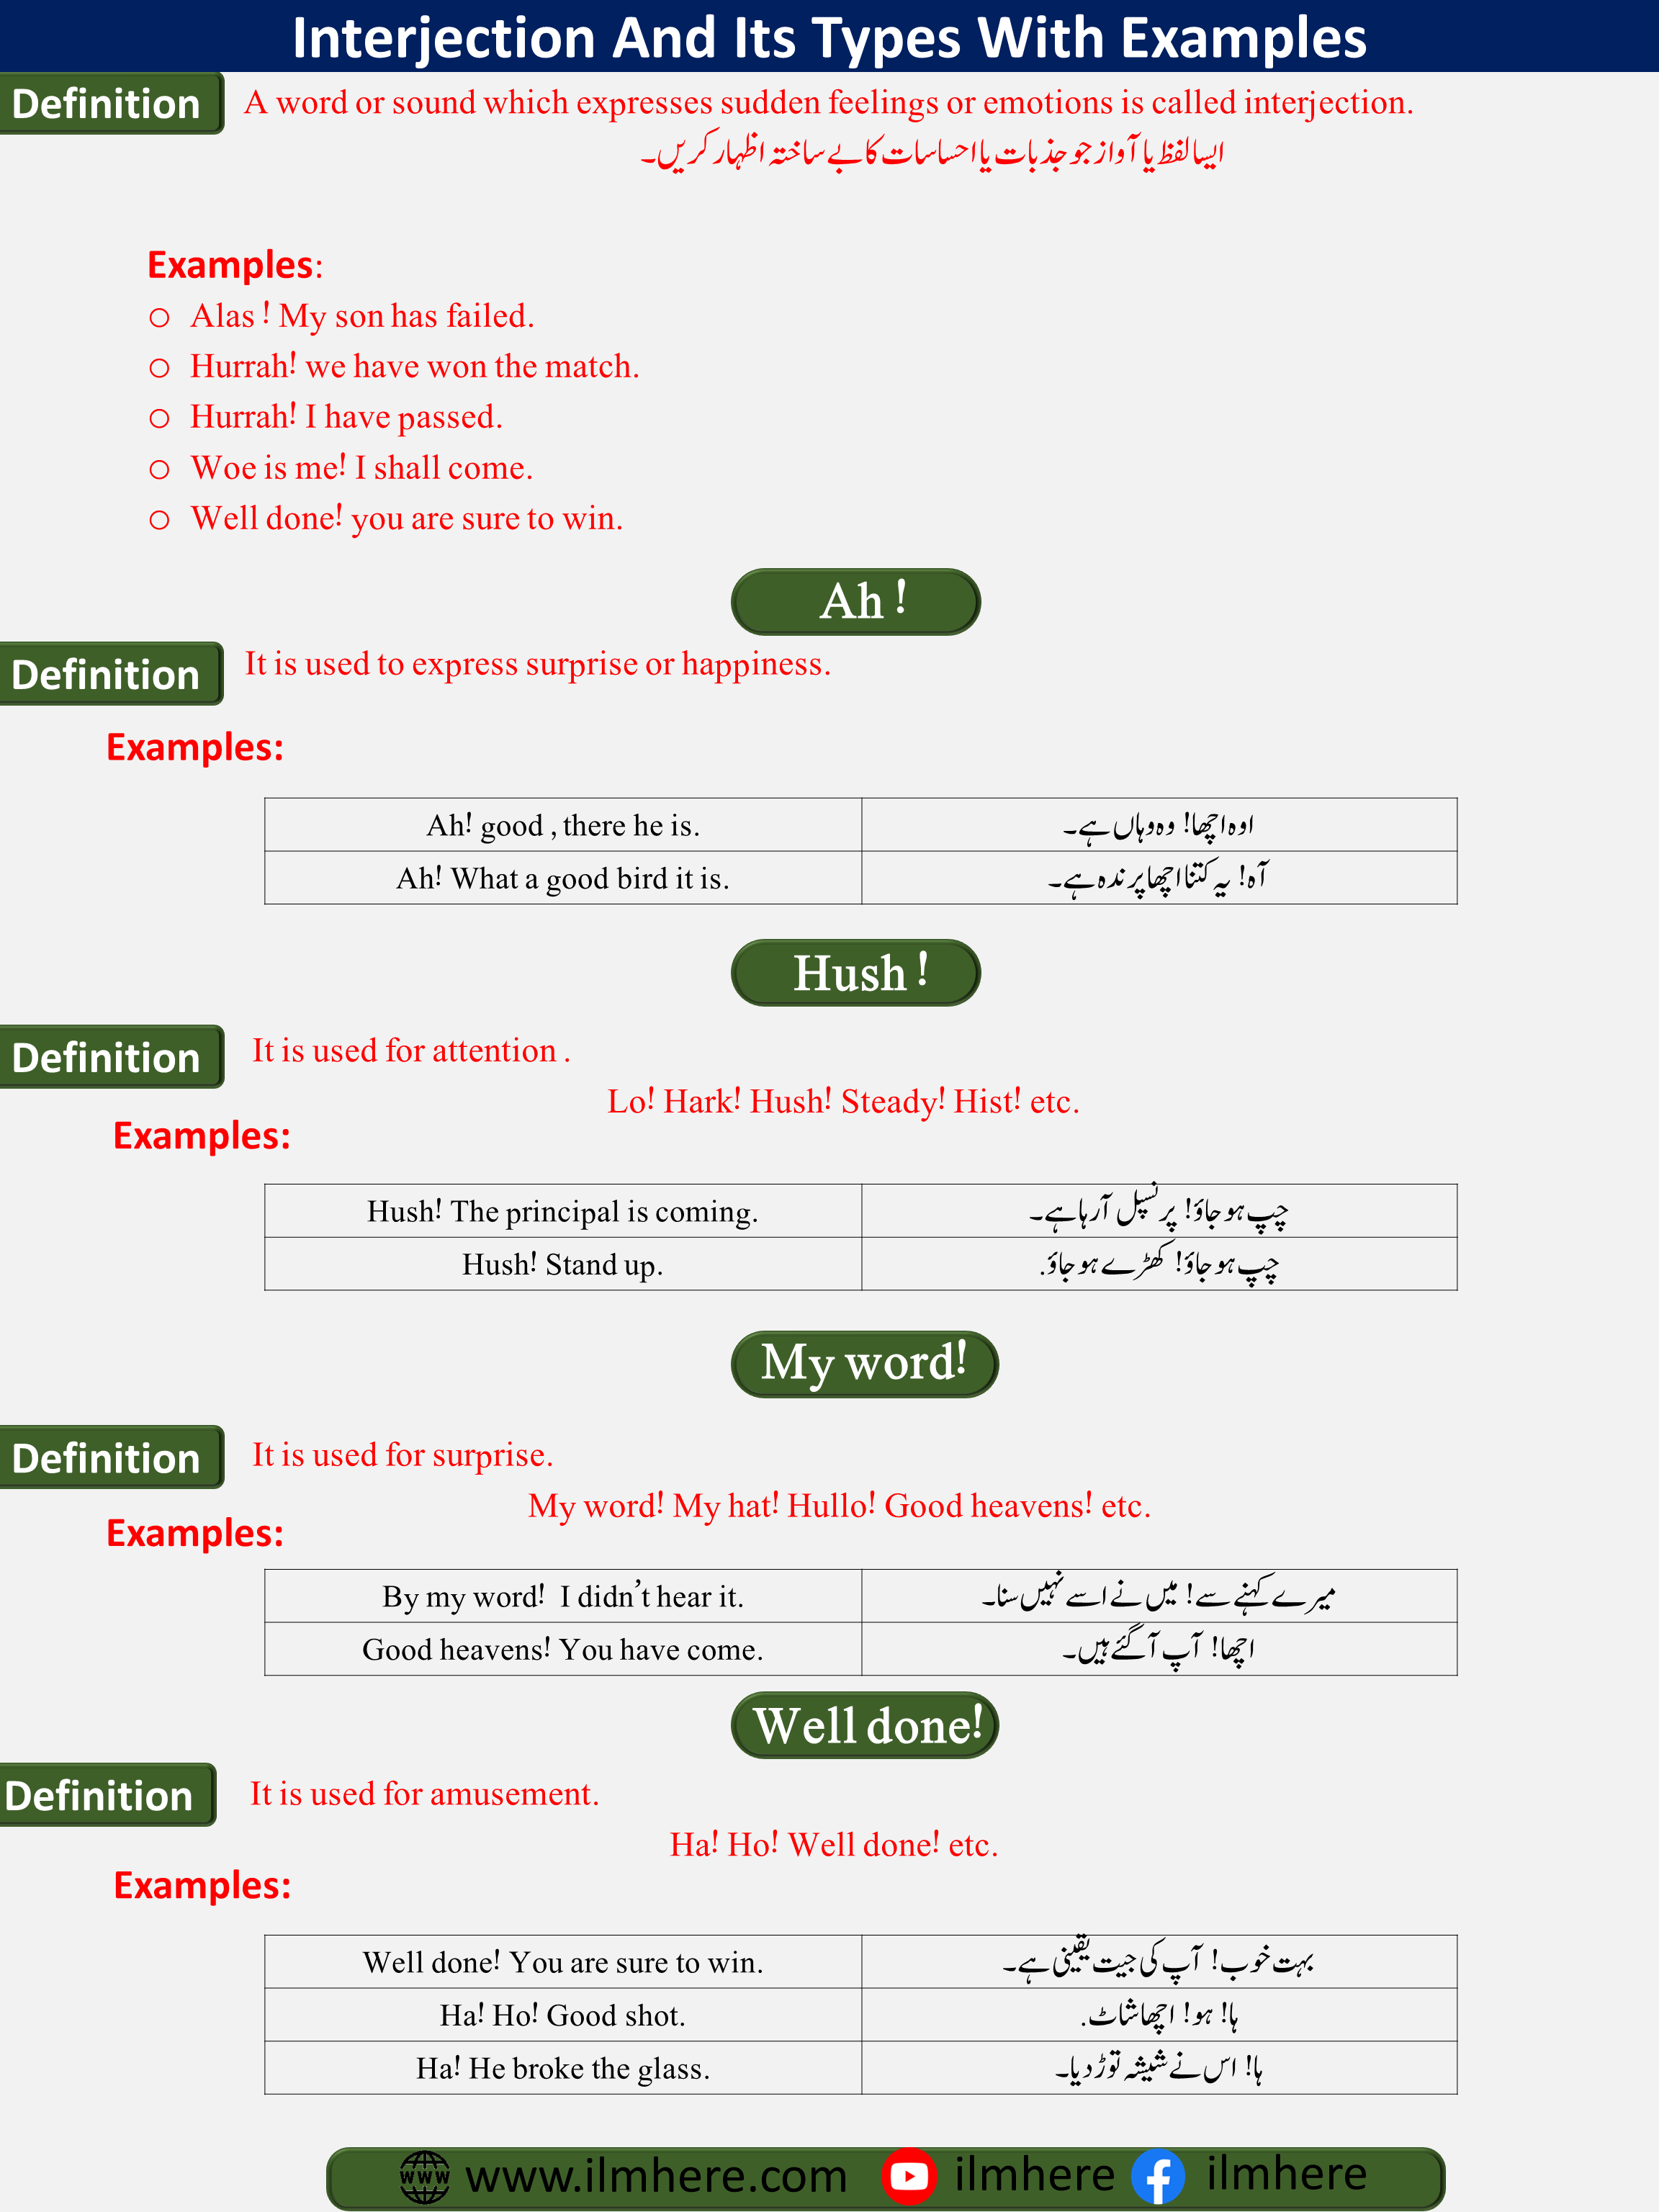 What is Interjection and Types Of Interjection In Urdu and English/Hindi With Examples